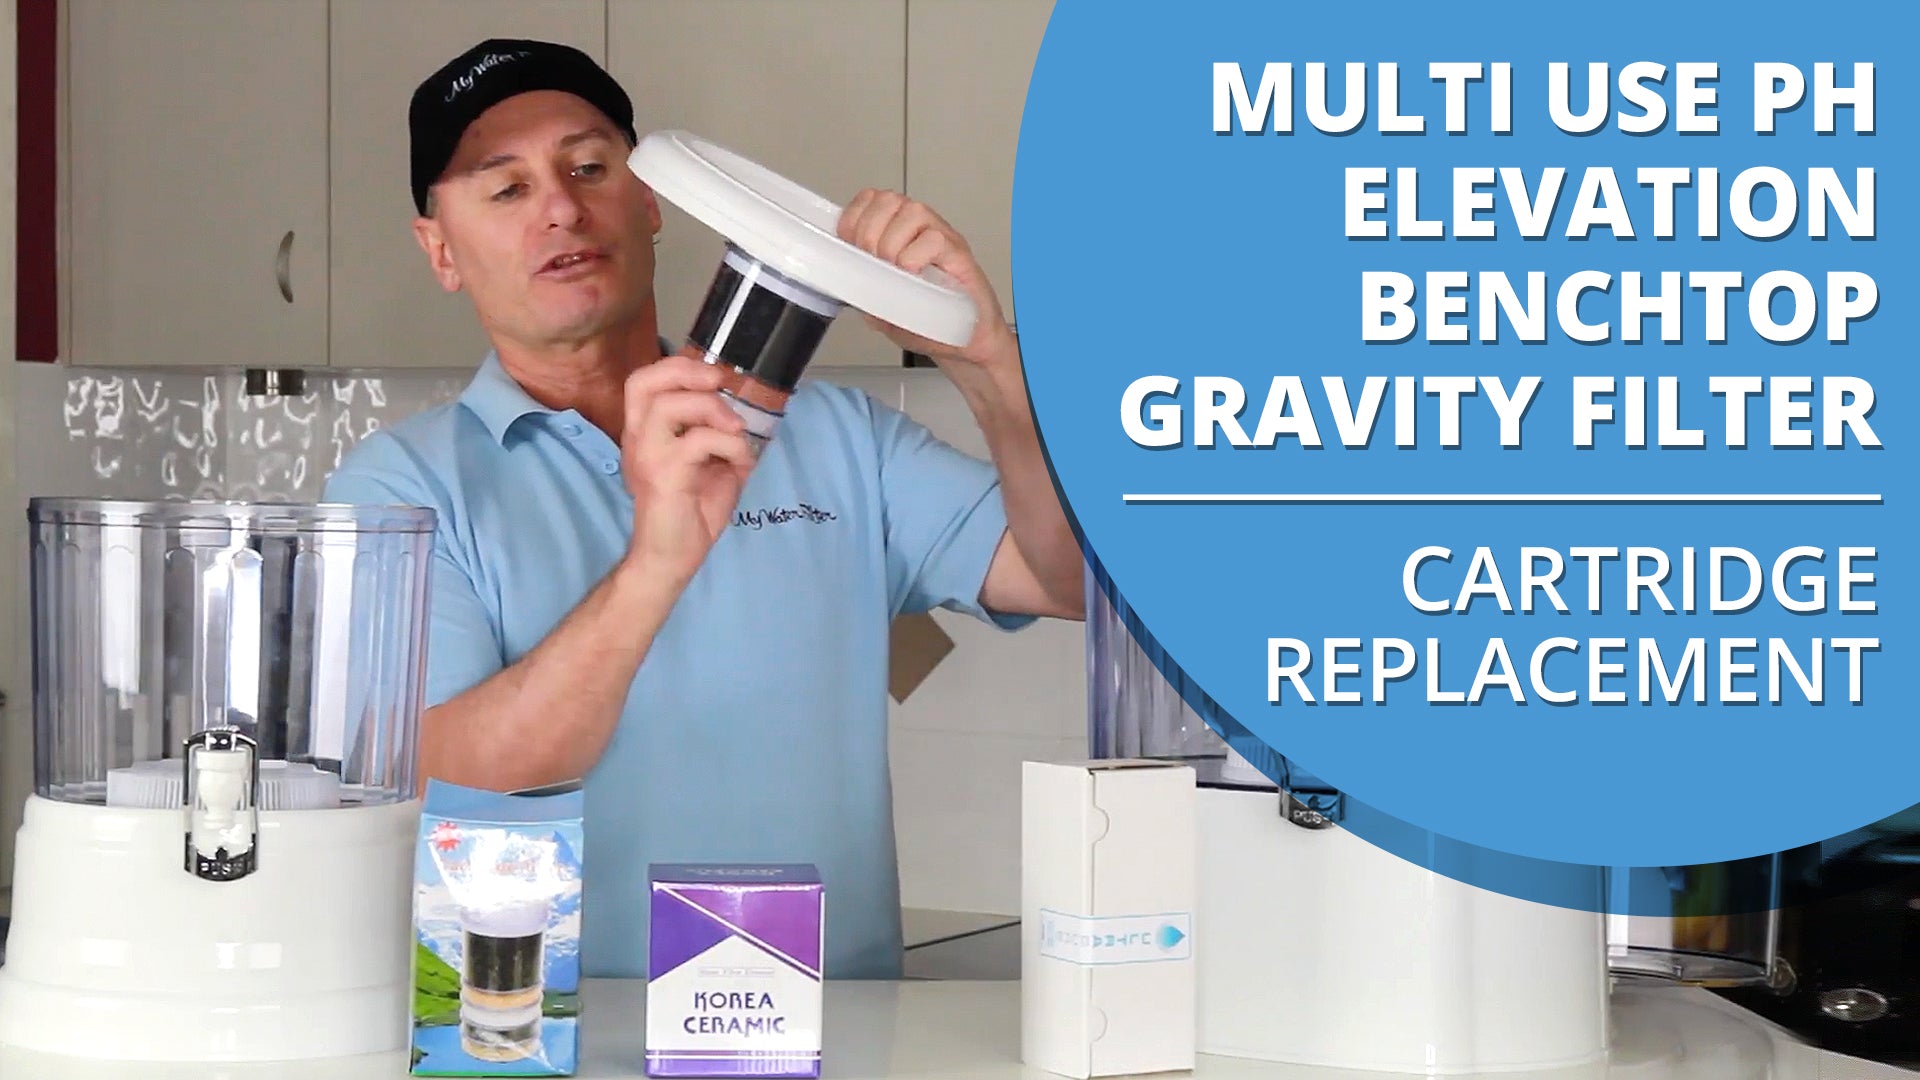 [VIDEO] How to change the cartridge in your Multi Use pH Elevation Benchtop Gravity Water Filter